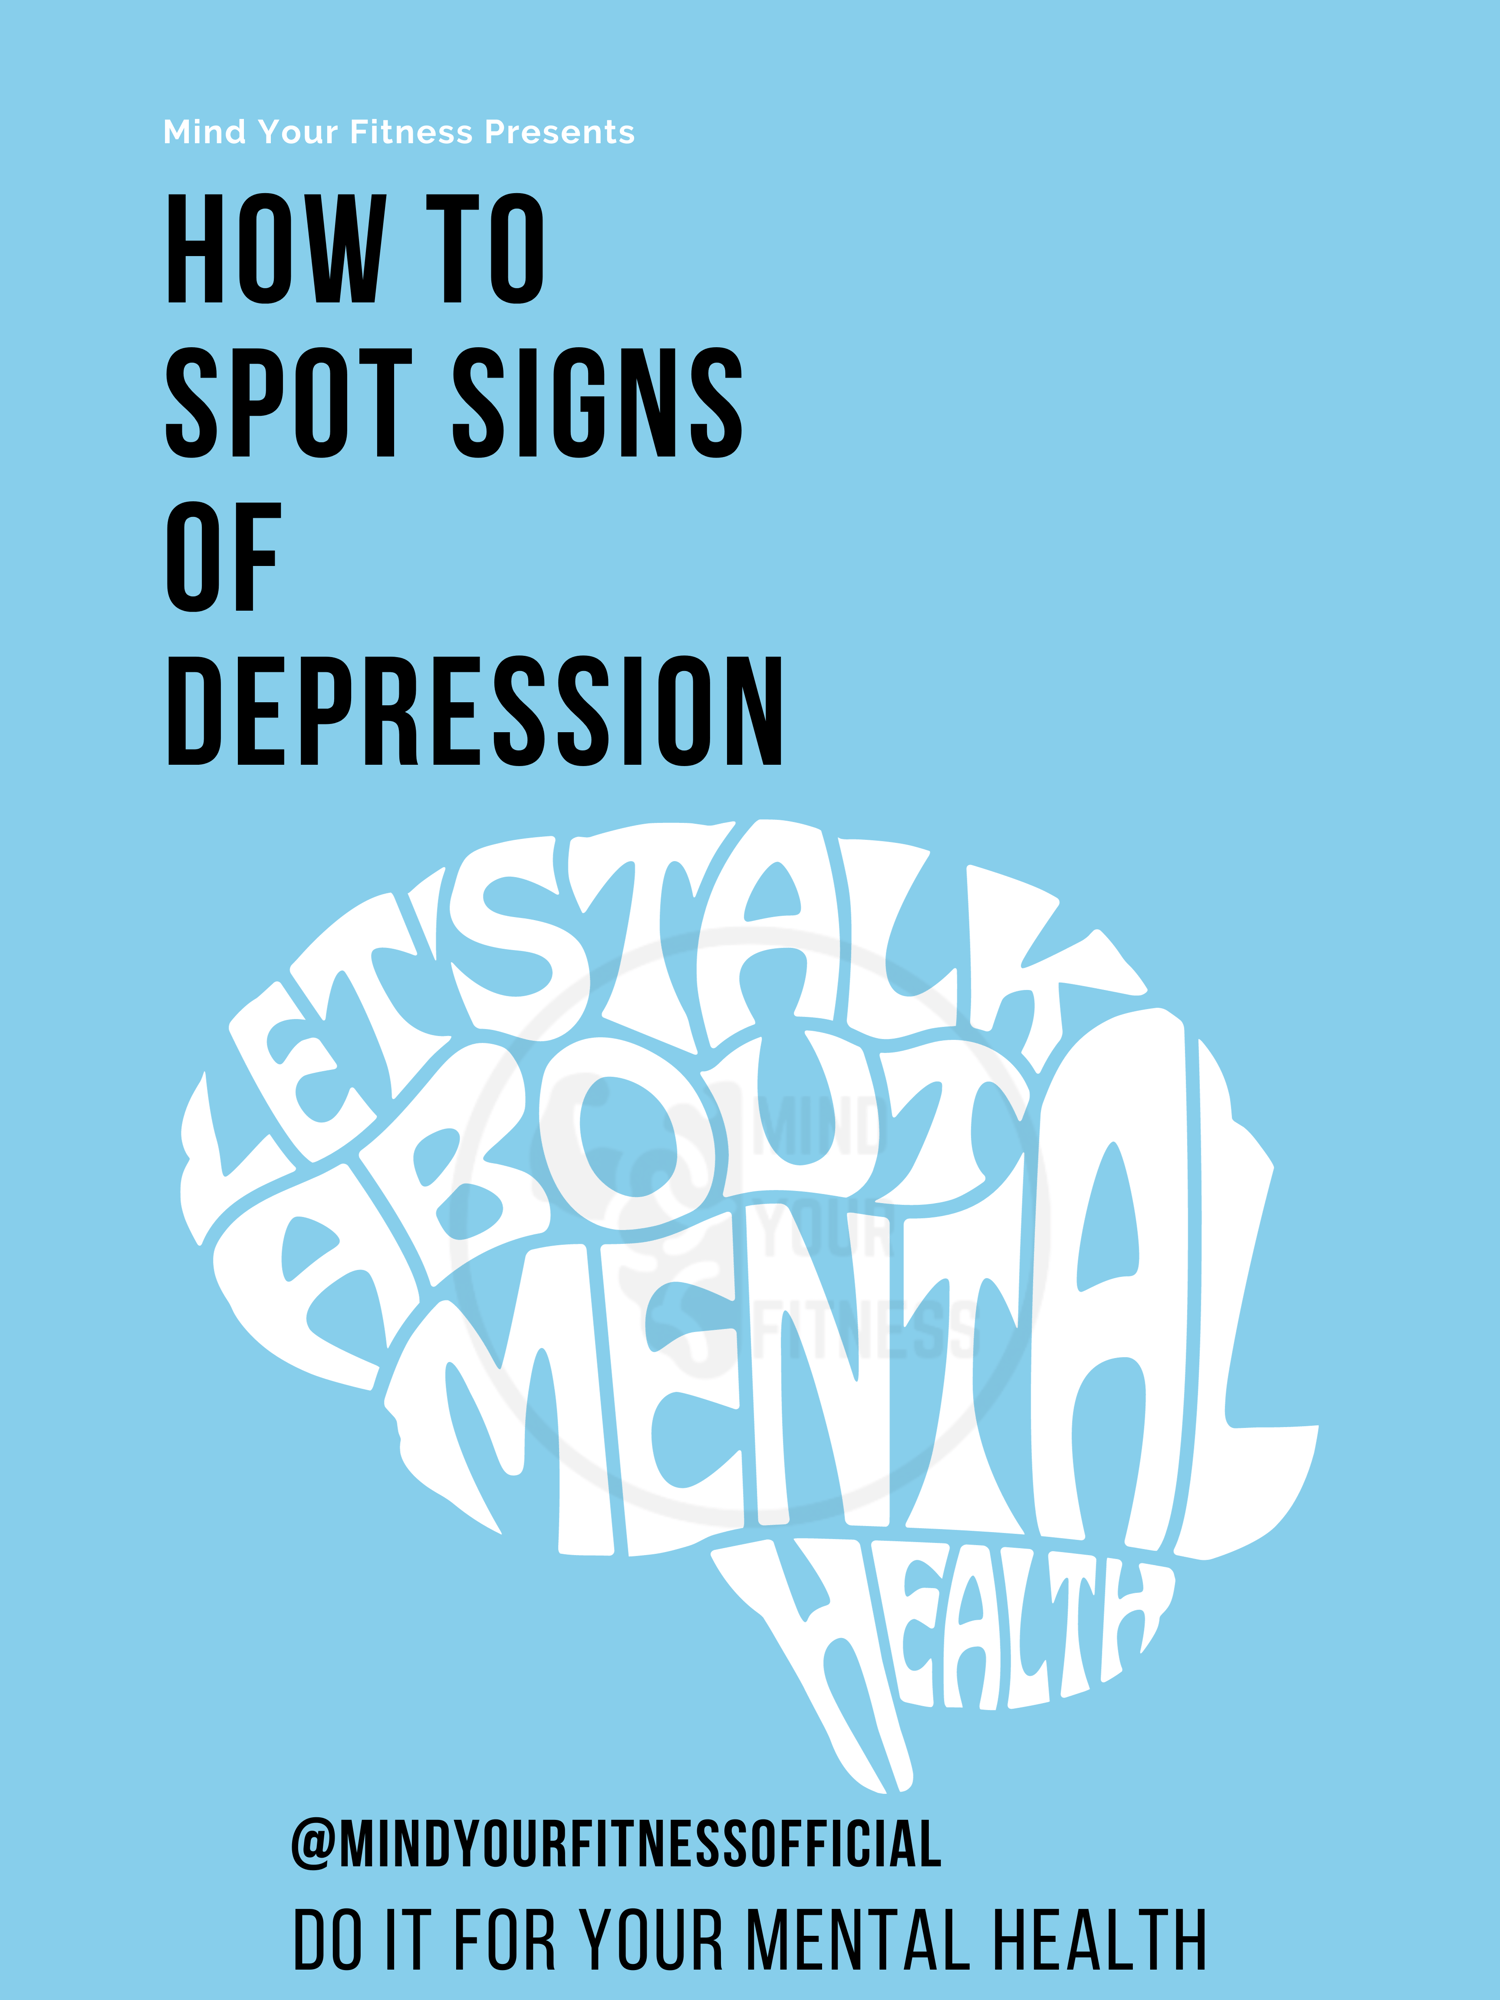 How to spot signs of depression - 1